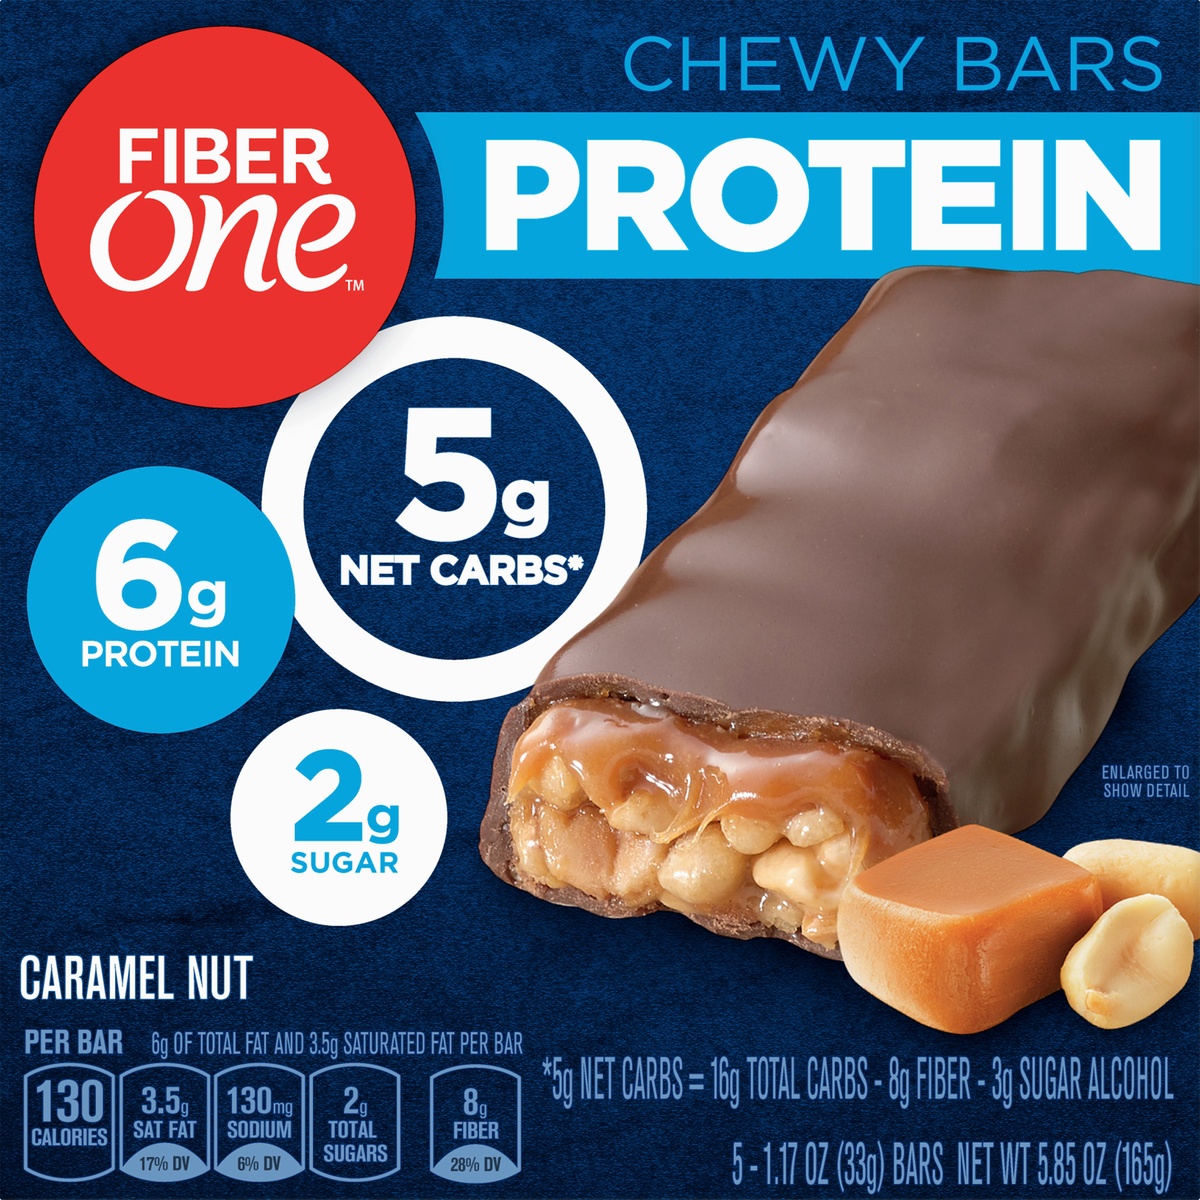 slide 10 of 10, Fiber One Chewy Bars Protein Caramel Nut, 5 ct